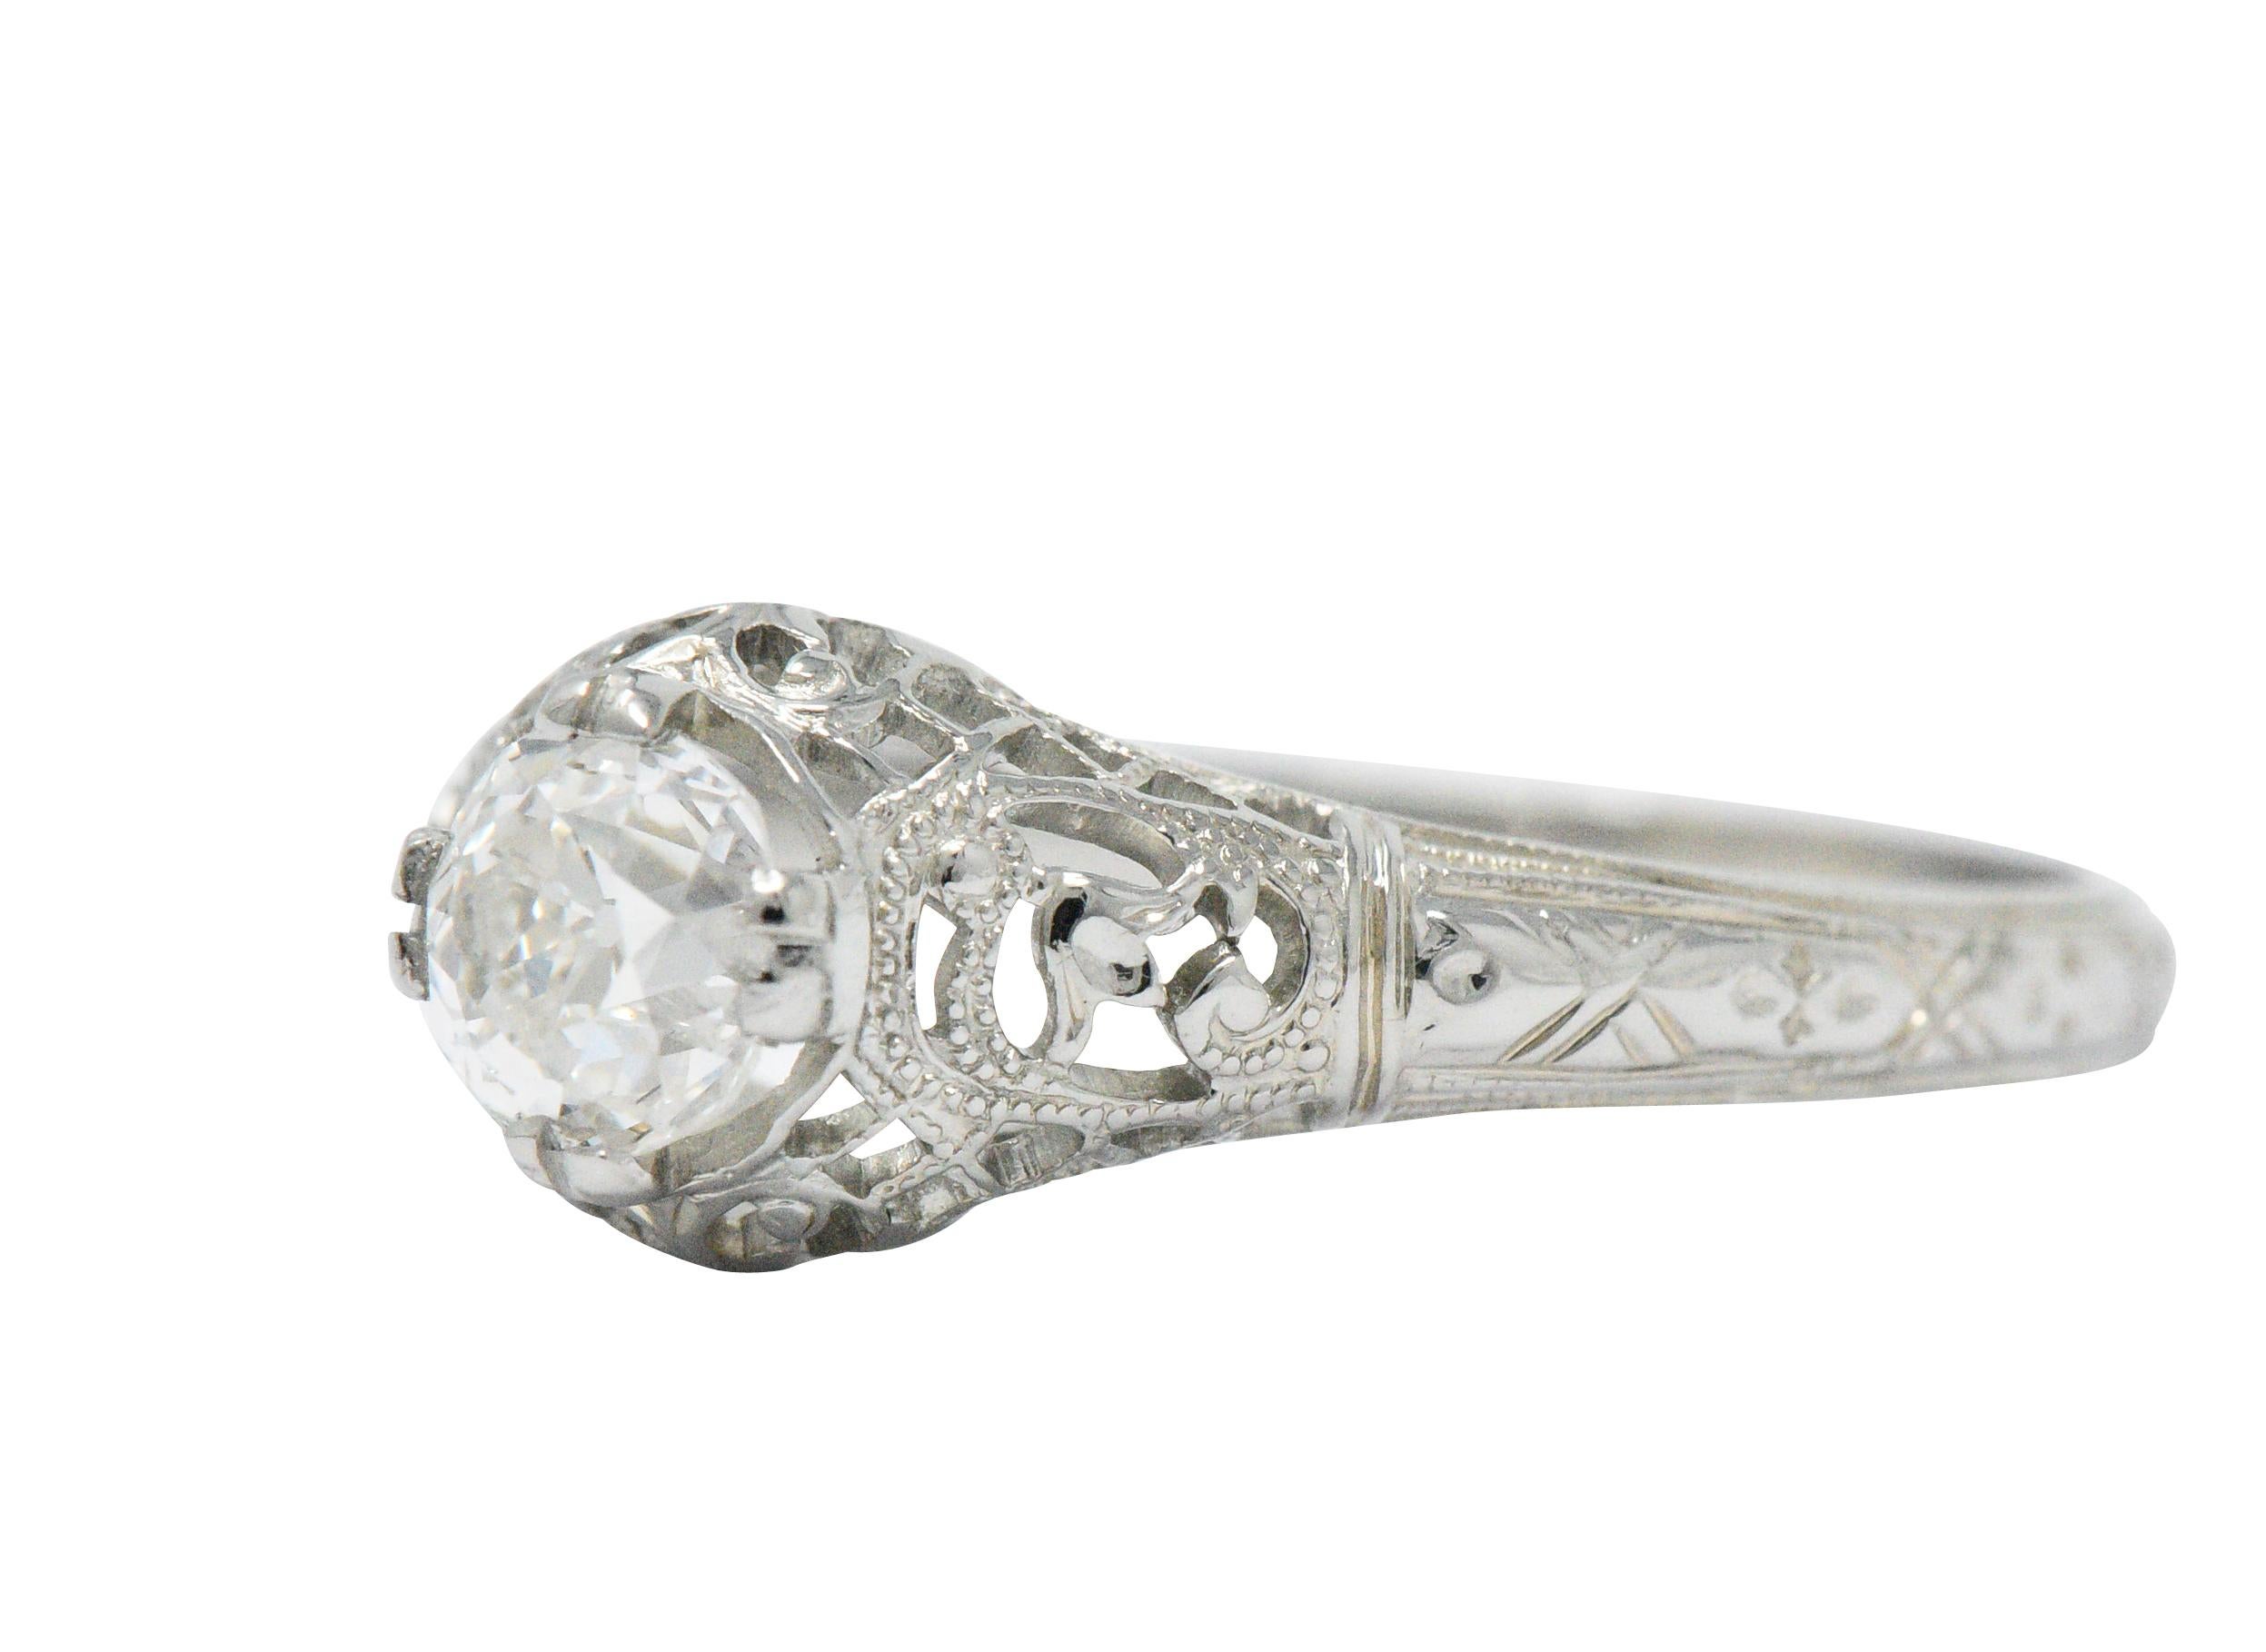 Centering an old mine cut diamond weighing 0.50 carat, H color with VS2 clarity

Prong set within mounting featuring a scrolled tulip motif at each cardinal point

With pierced lattice gallery with milgrain detail and engraved foliate shank

Tested